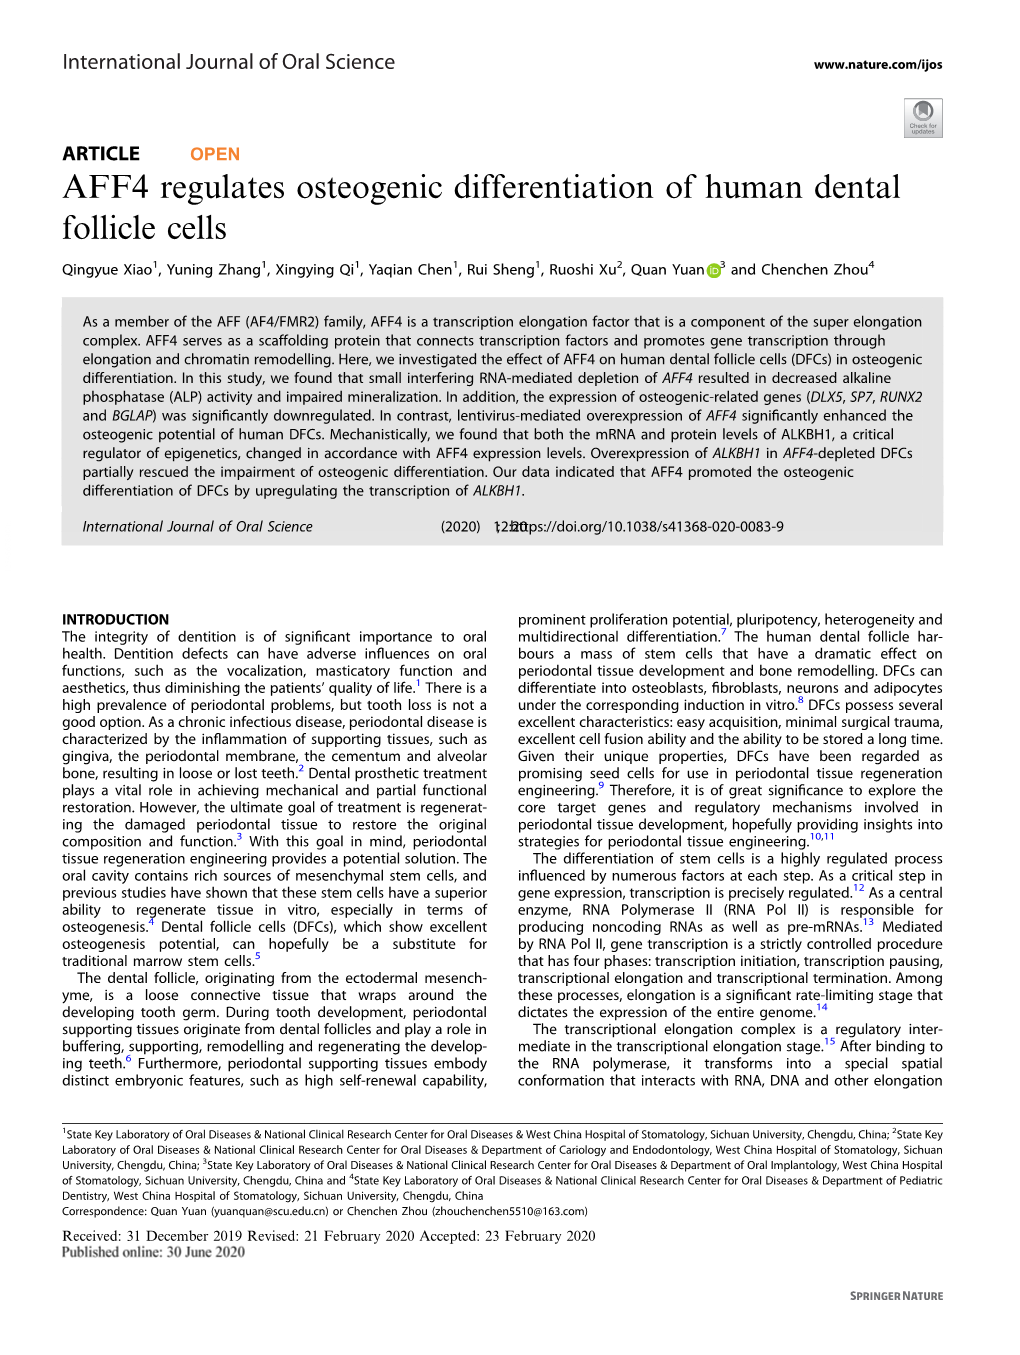 AFF4 Regulates Osteogenic Differentiation of Human Dental Follicle Cells